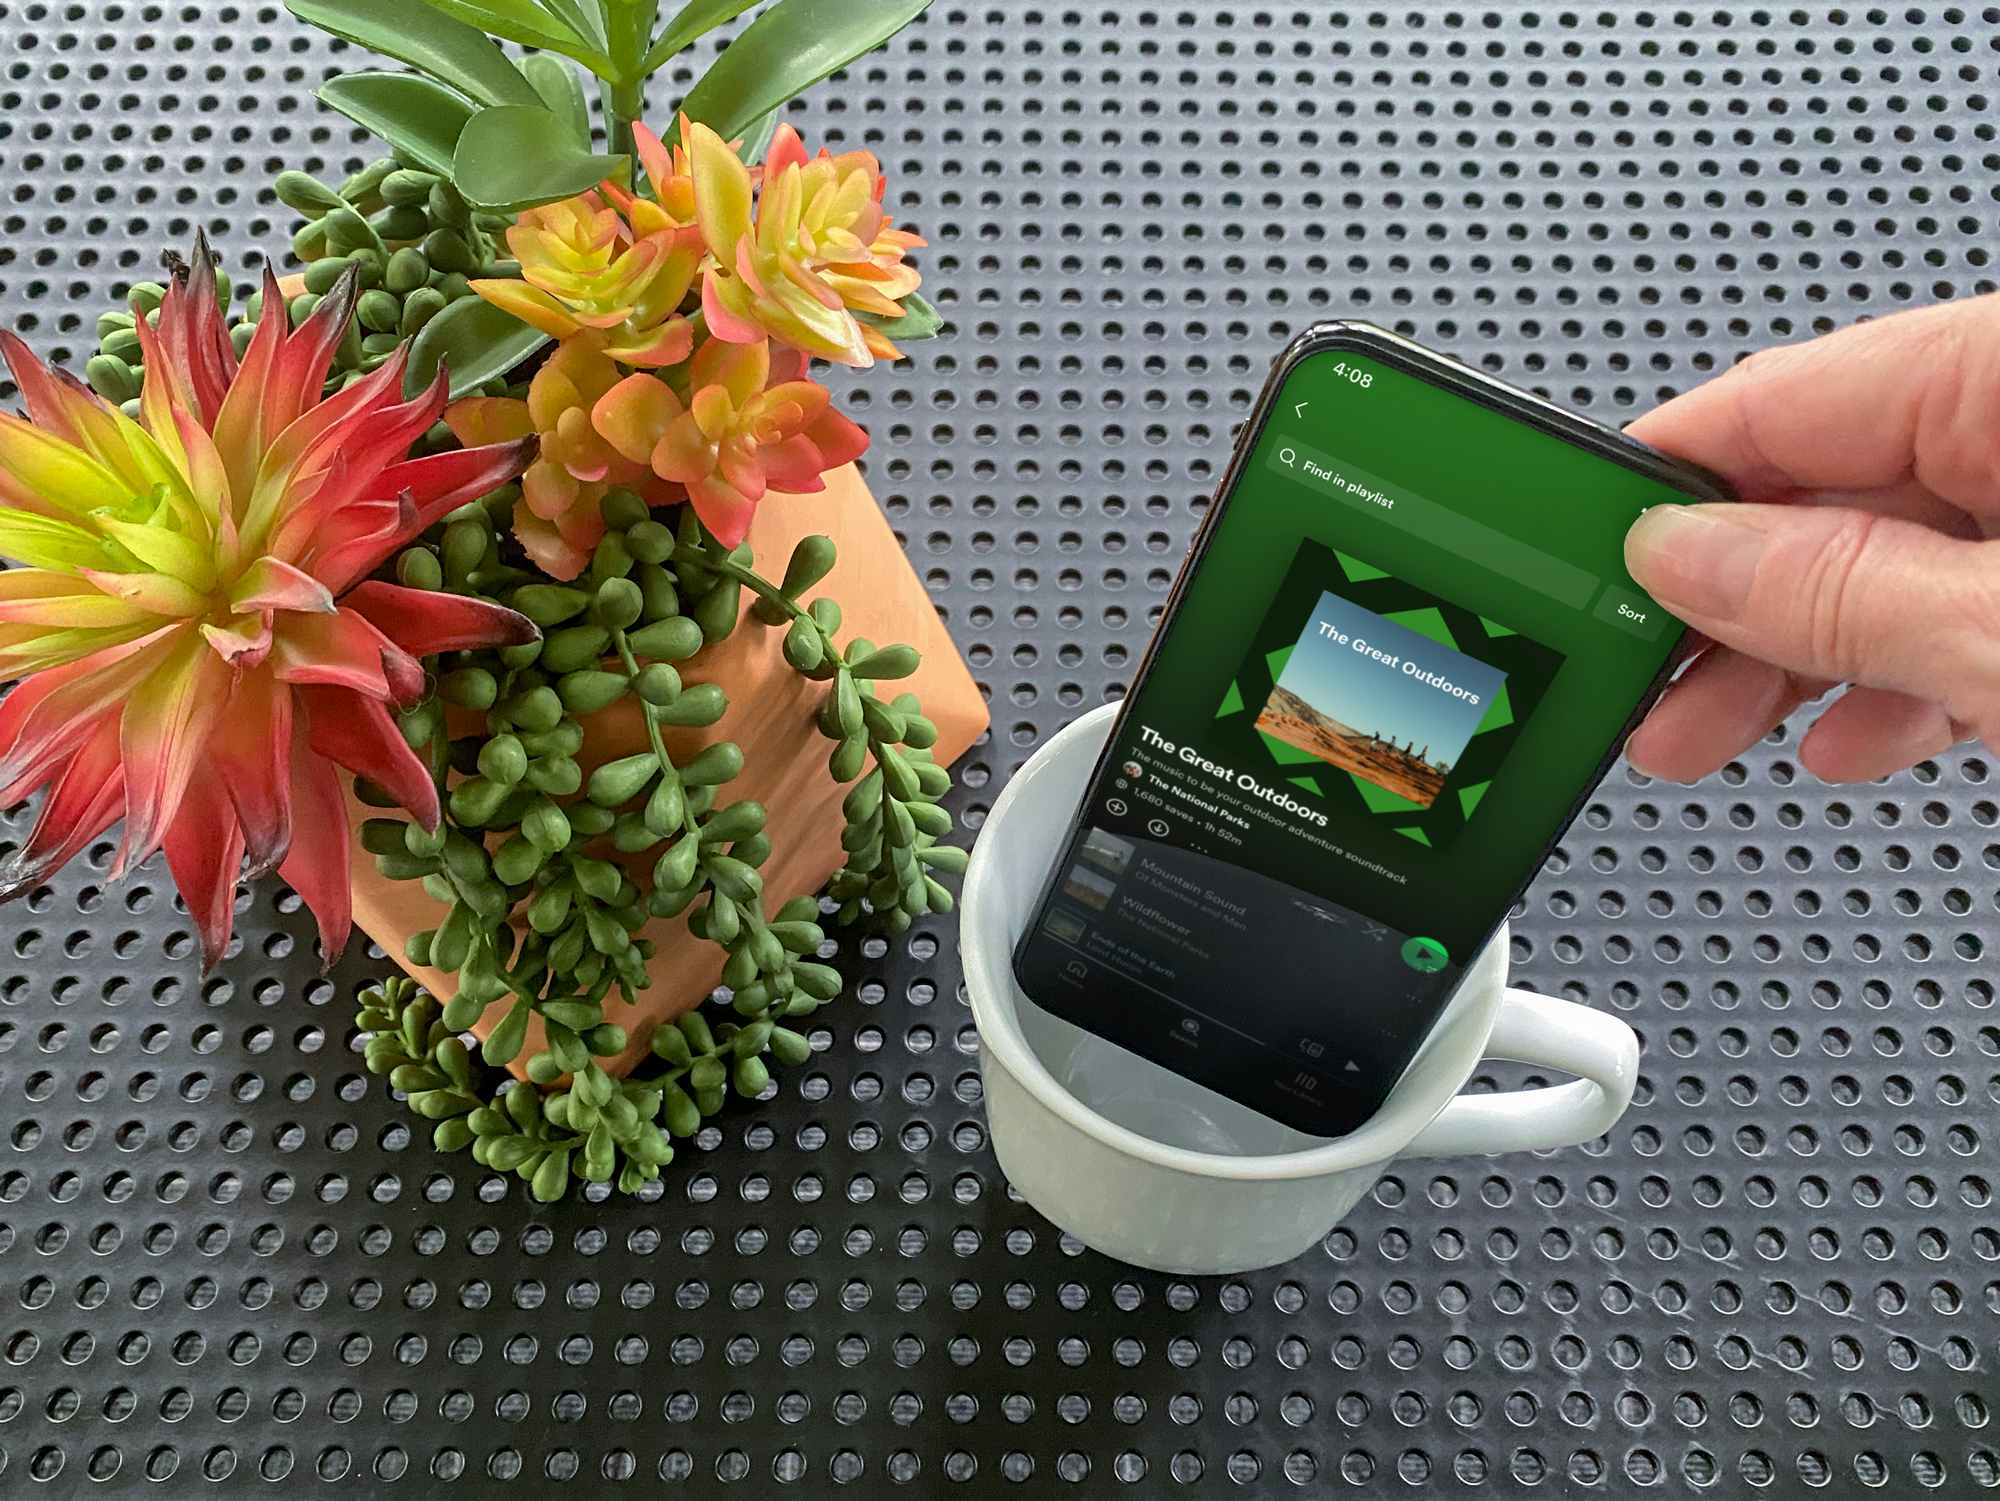 person placing a phone with spotify music playing into a coffee mug for sound amplification